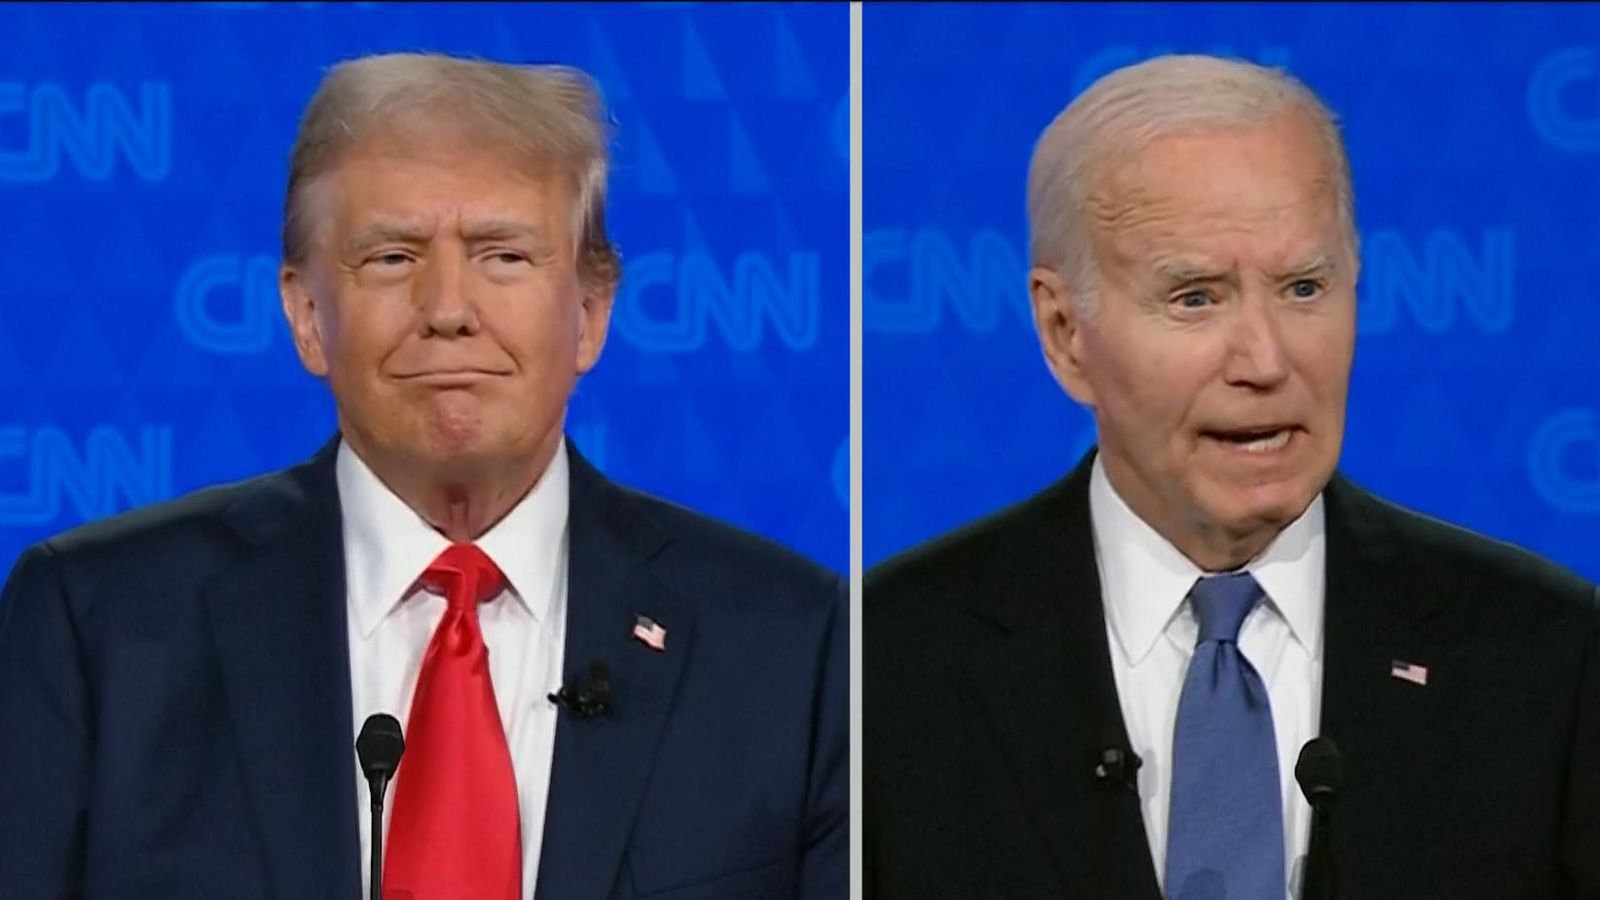 Donald Trump and Joe Biden: The key moments in the US' first debate